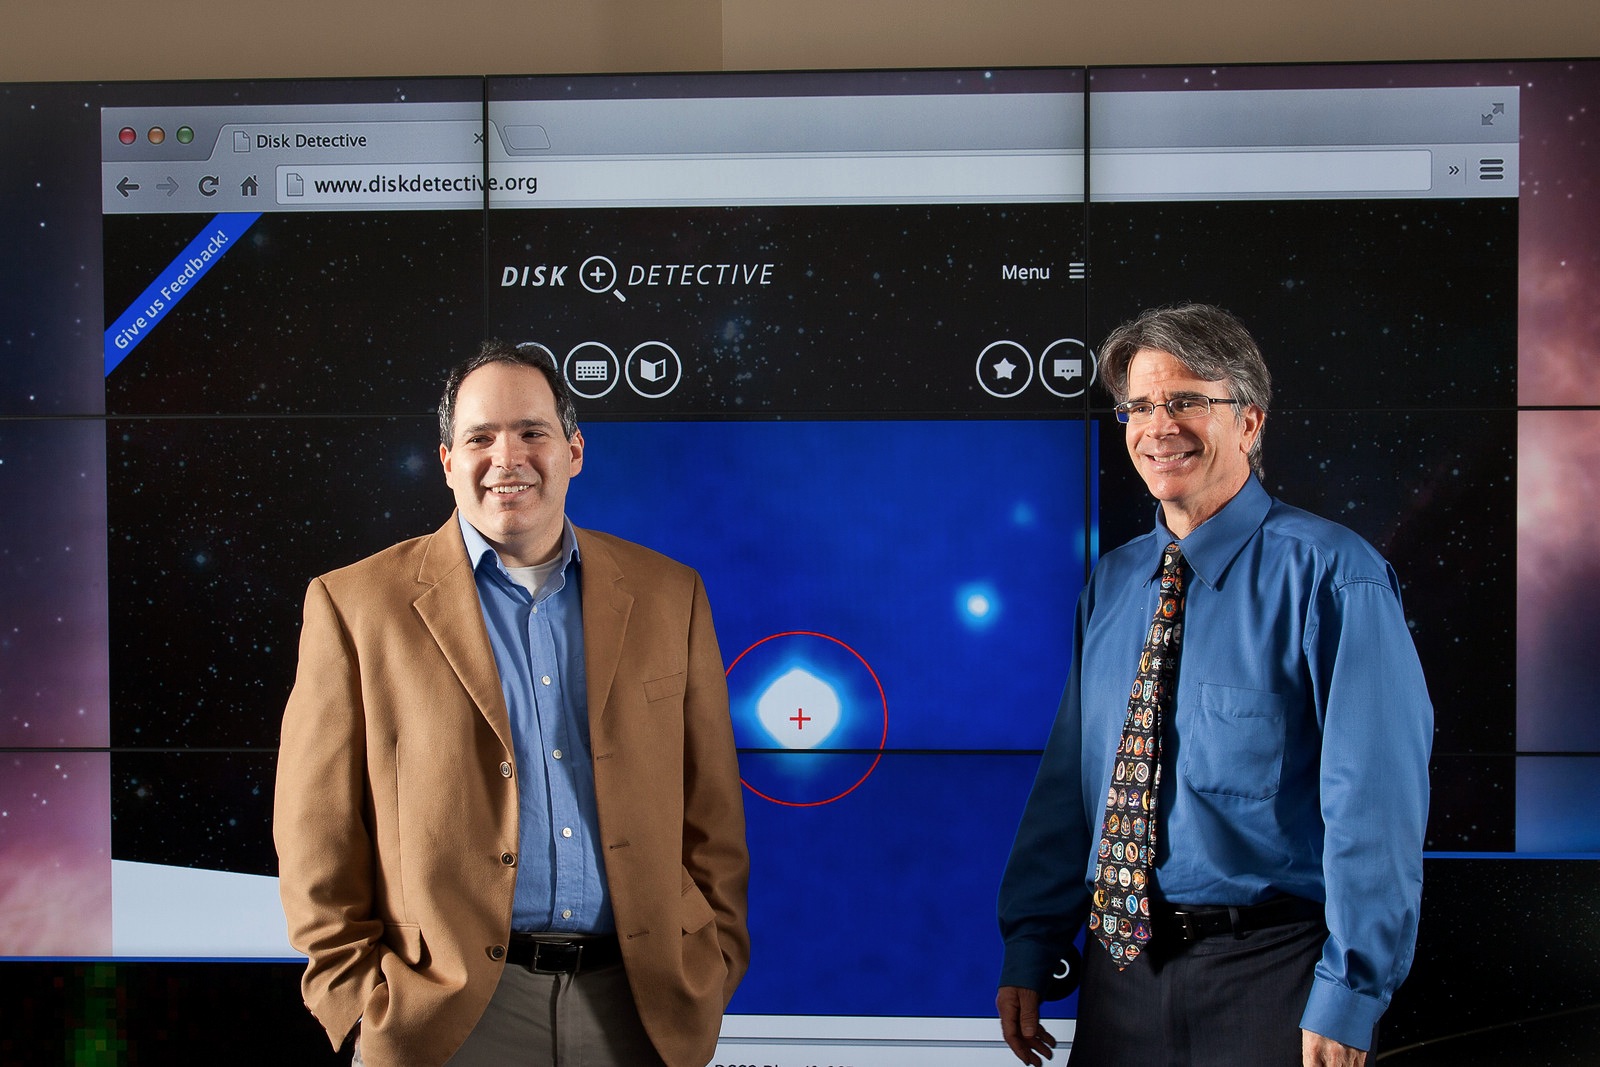 Marc Kuchner, the principal investigator for DiskDetective.org (left) and James Garvin, the chief scientist for NASA Goddard's Sciences and Exploration Directorate, discuss the crowdsourcing project in front of the hyperwall at Goddard's Science Visualization Lab. Credit: NASA's Goddard Space Flight Center/David Friedlander